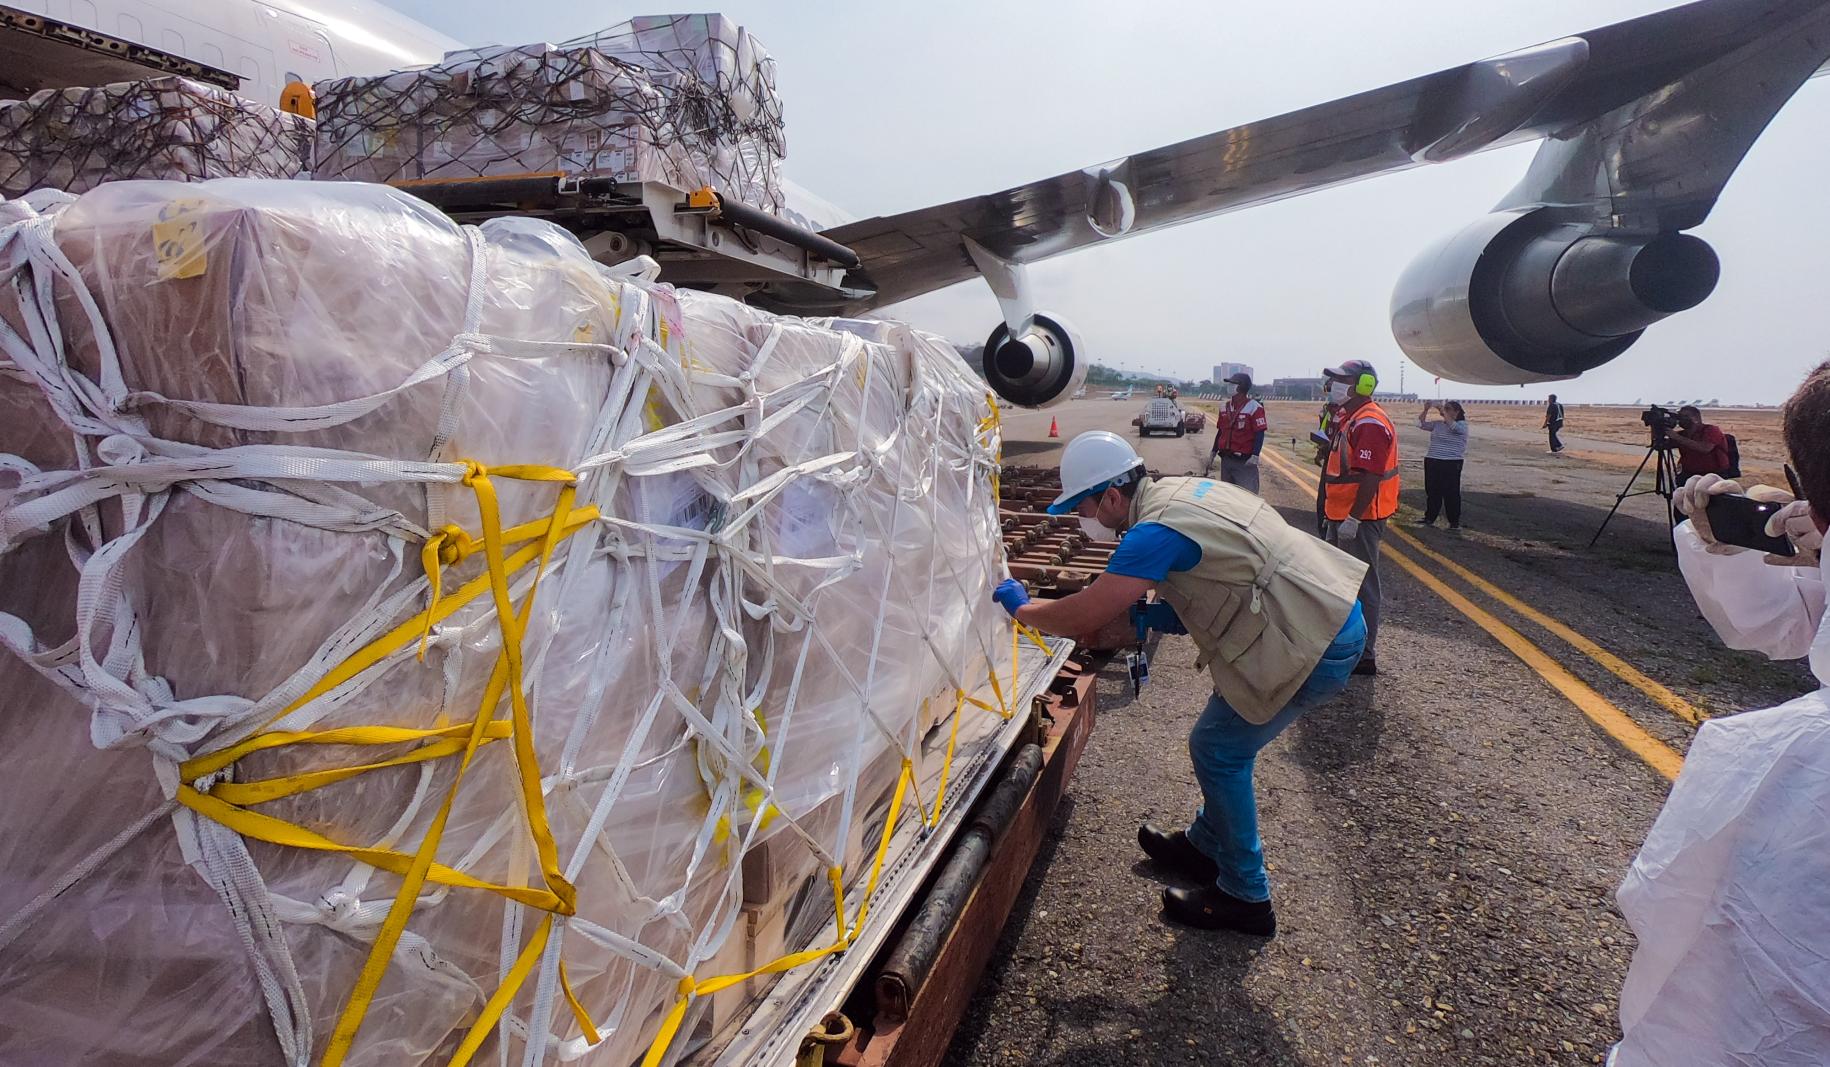 A plane, managed by UNICEF, arrived in the country with 90 tons of supplies to support with COVID-19 response.